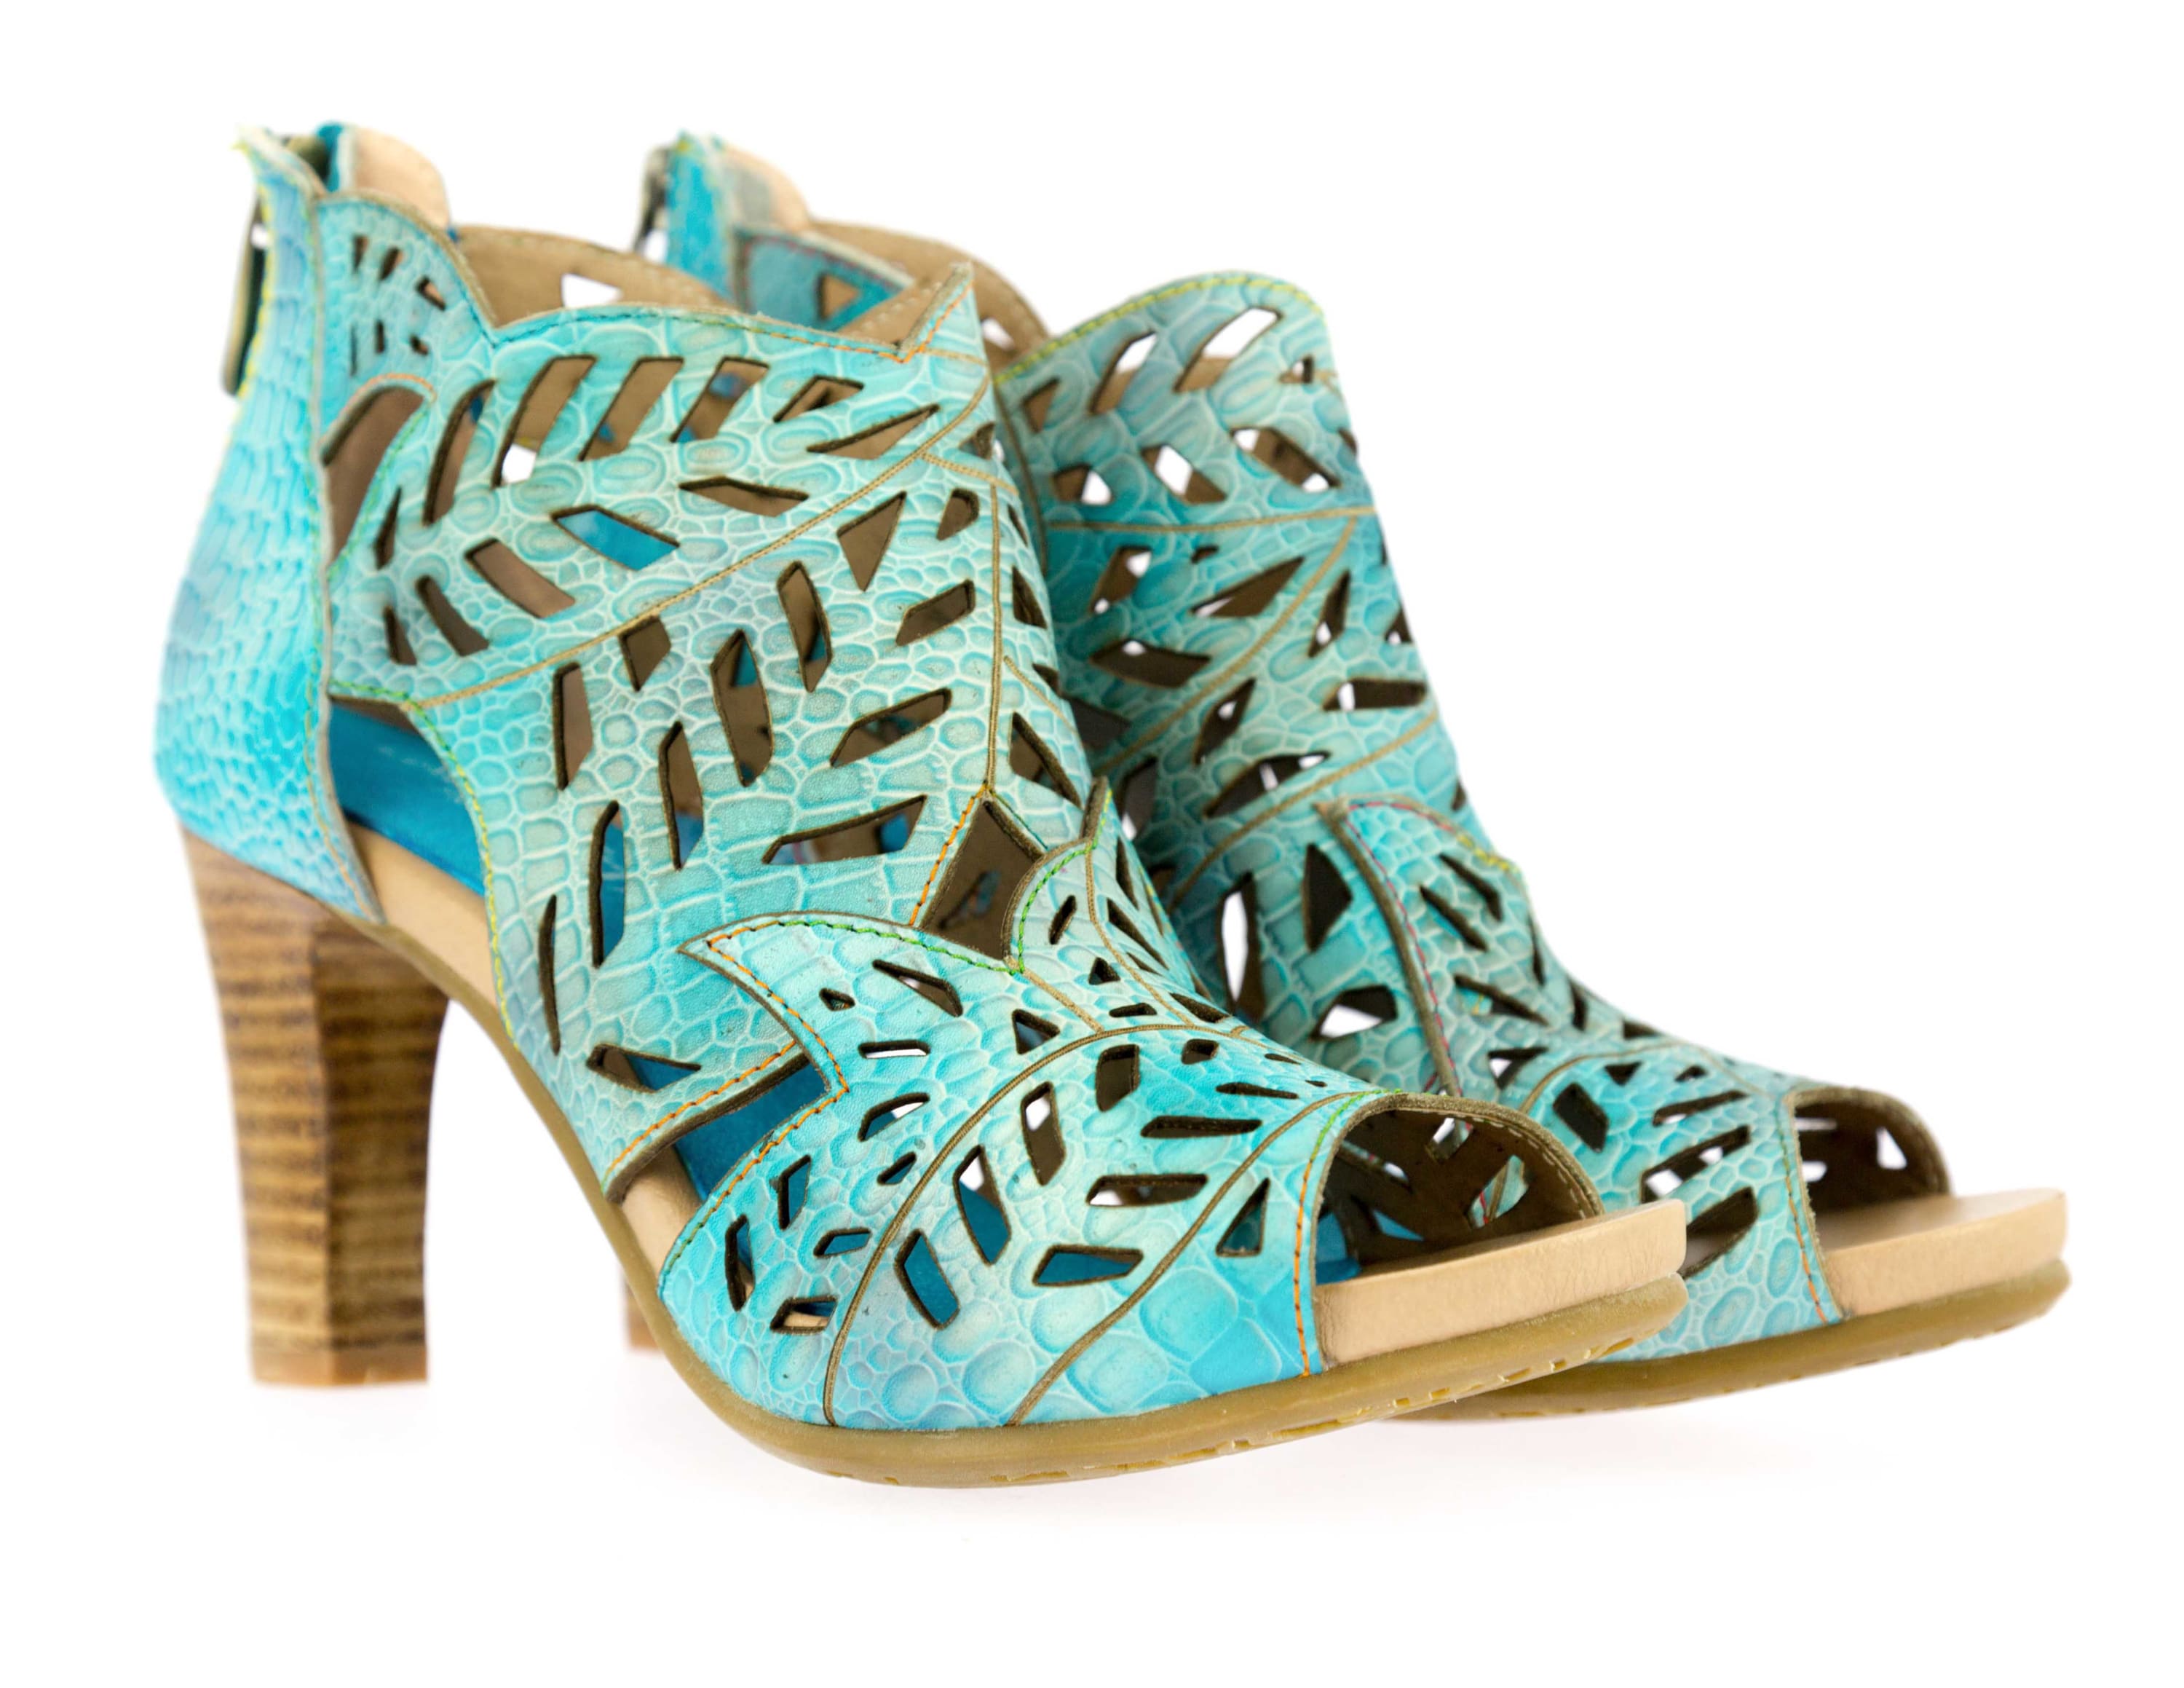 Chaussure ALBANE 04 - 35 / Turquoise - Sandale